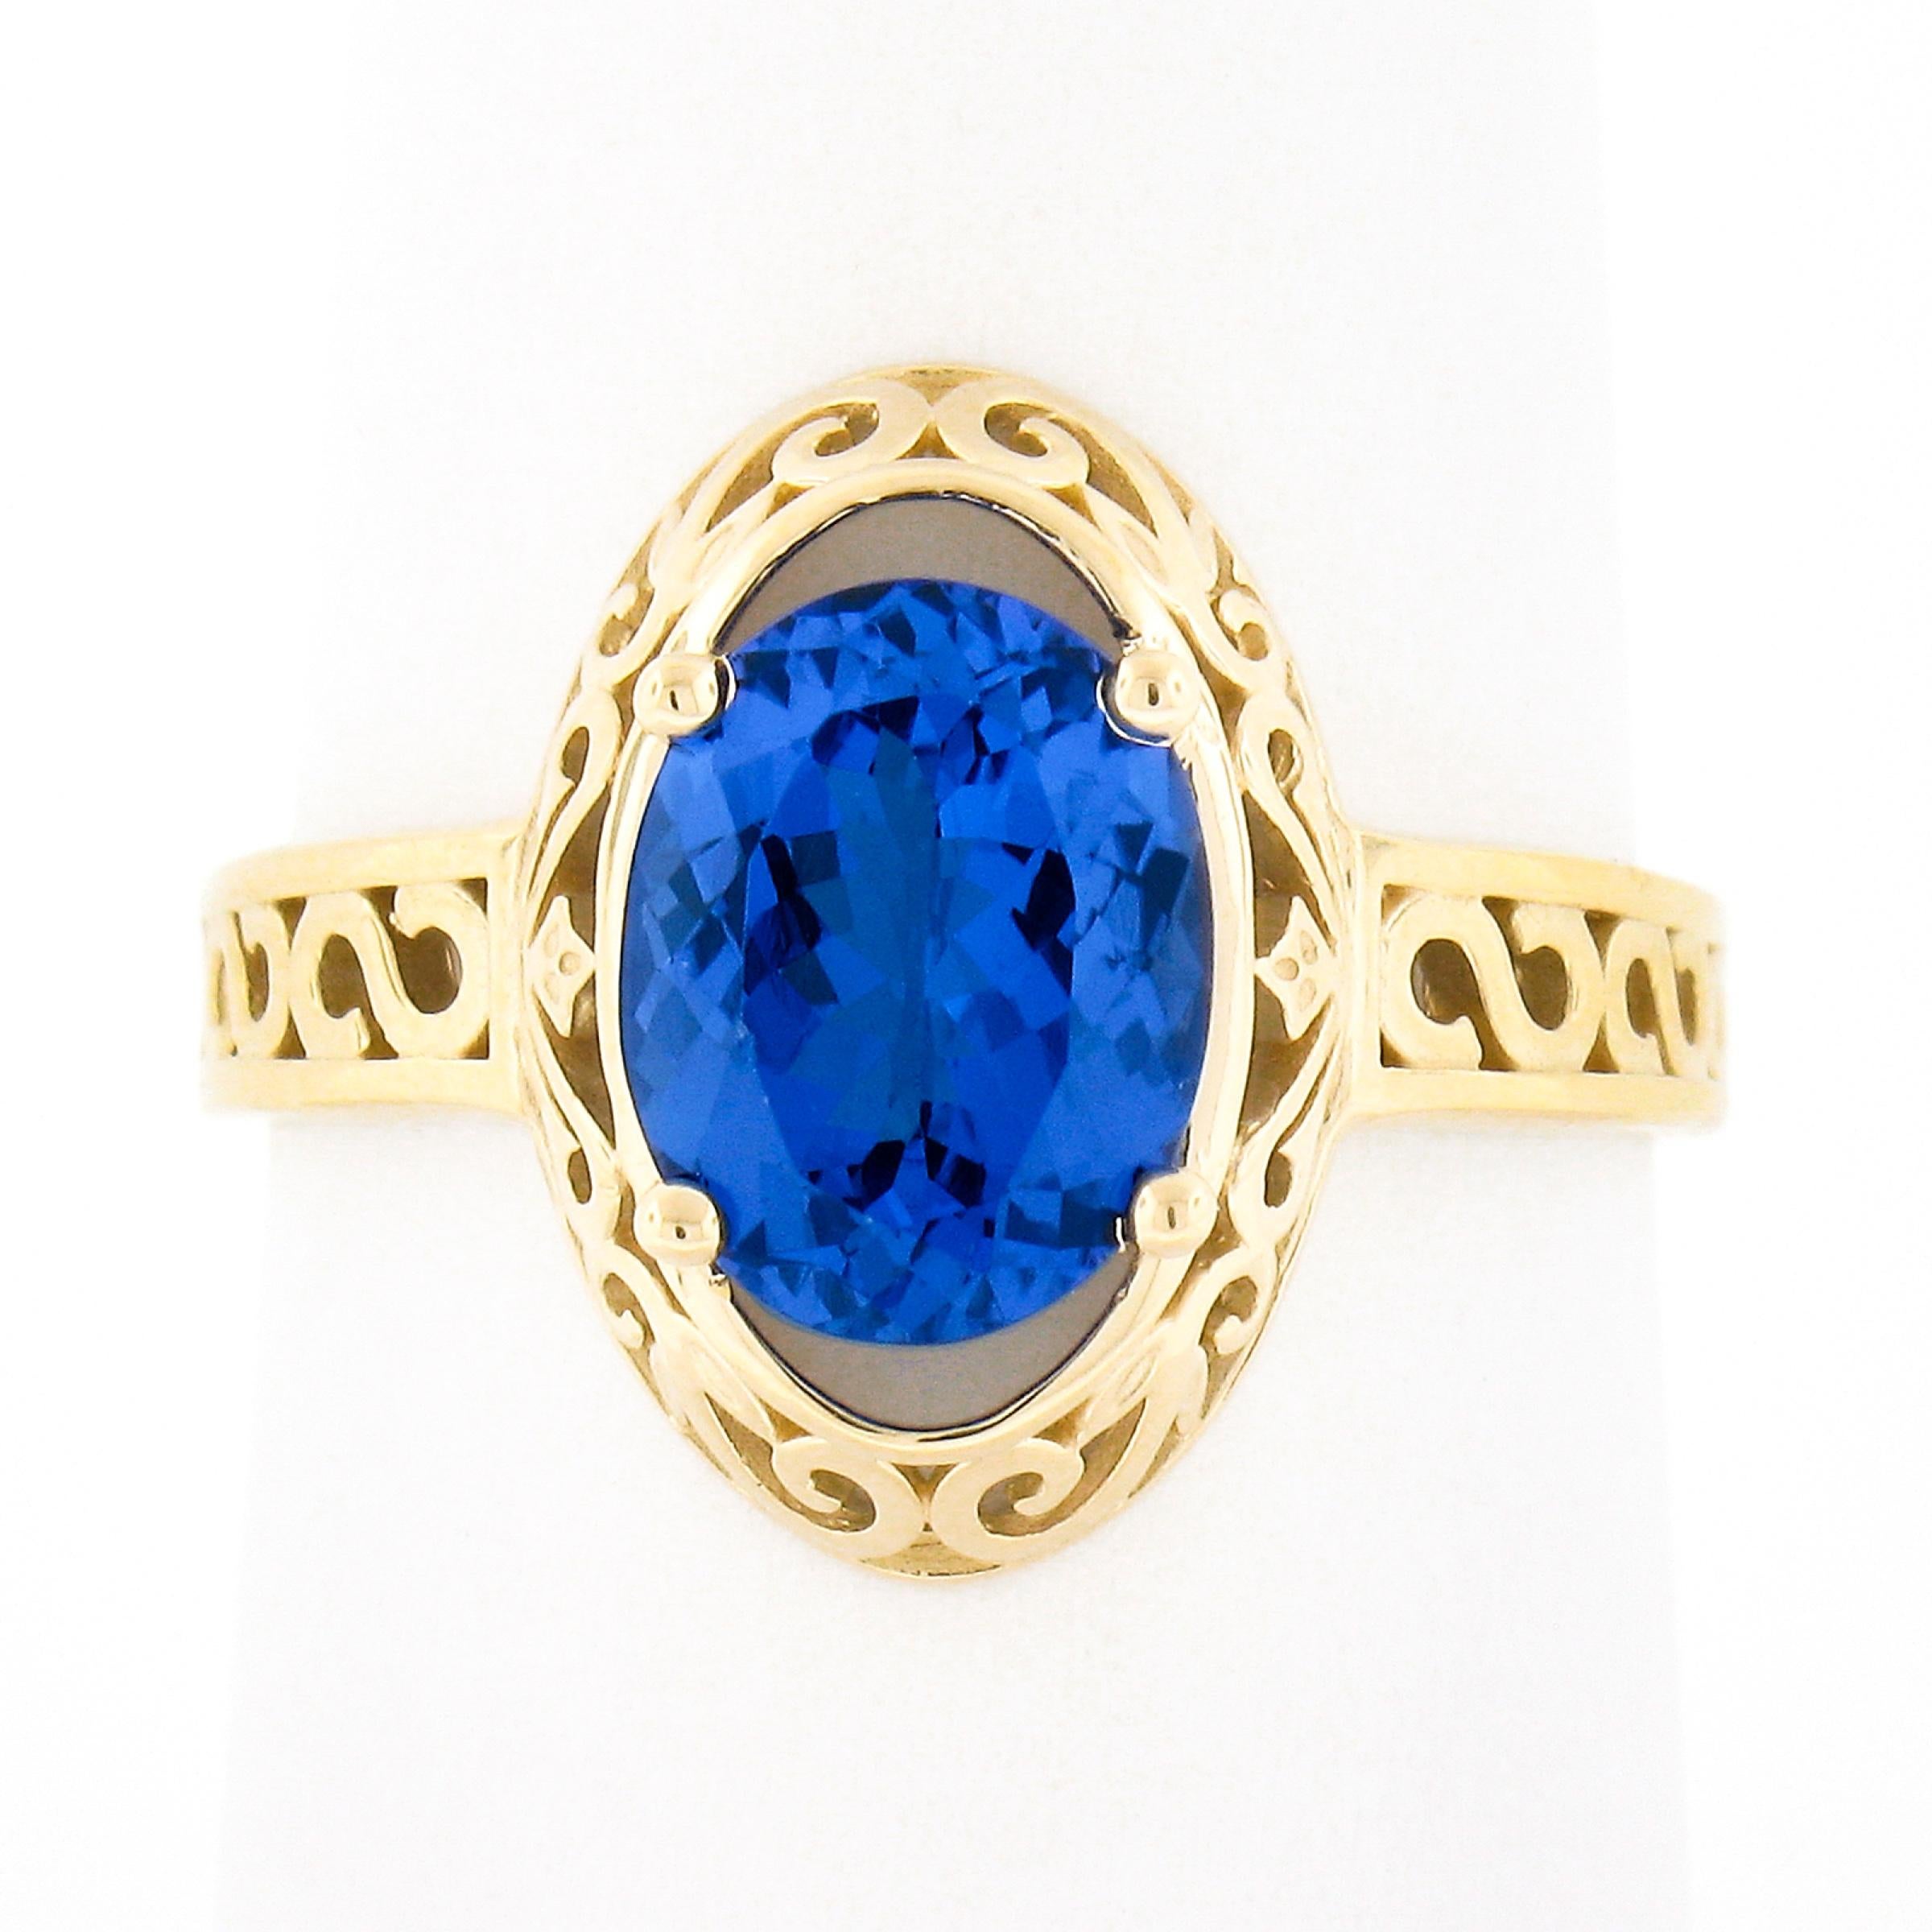 This gorgeous tanzanite ring is newly crafted in solid 14k yellow gold and features a beautiful, approximately 2.0 carat, tanzanite solitaire neatly prong set at the center of the elegant scroll open work design. The solitaire has an oval cut with